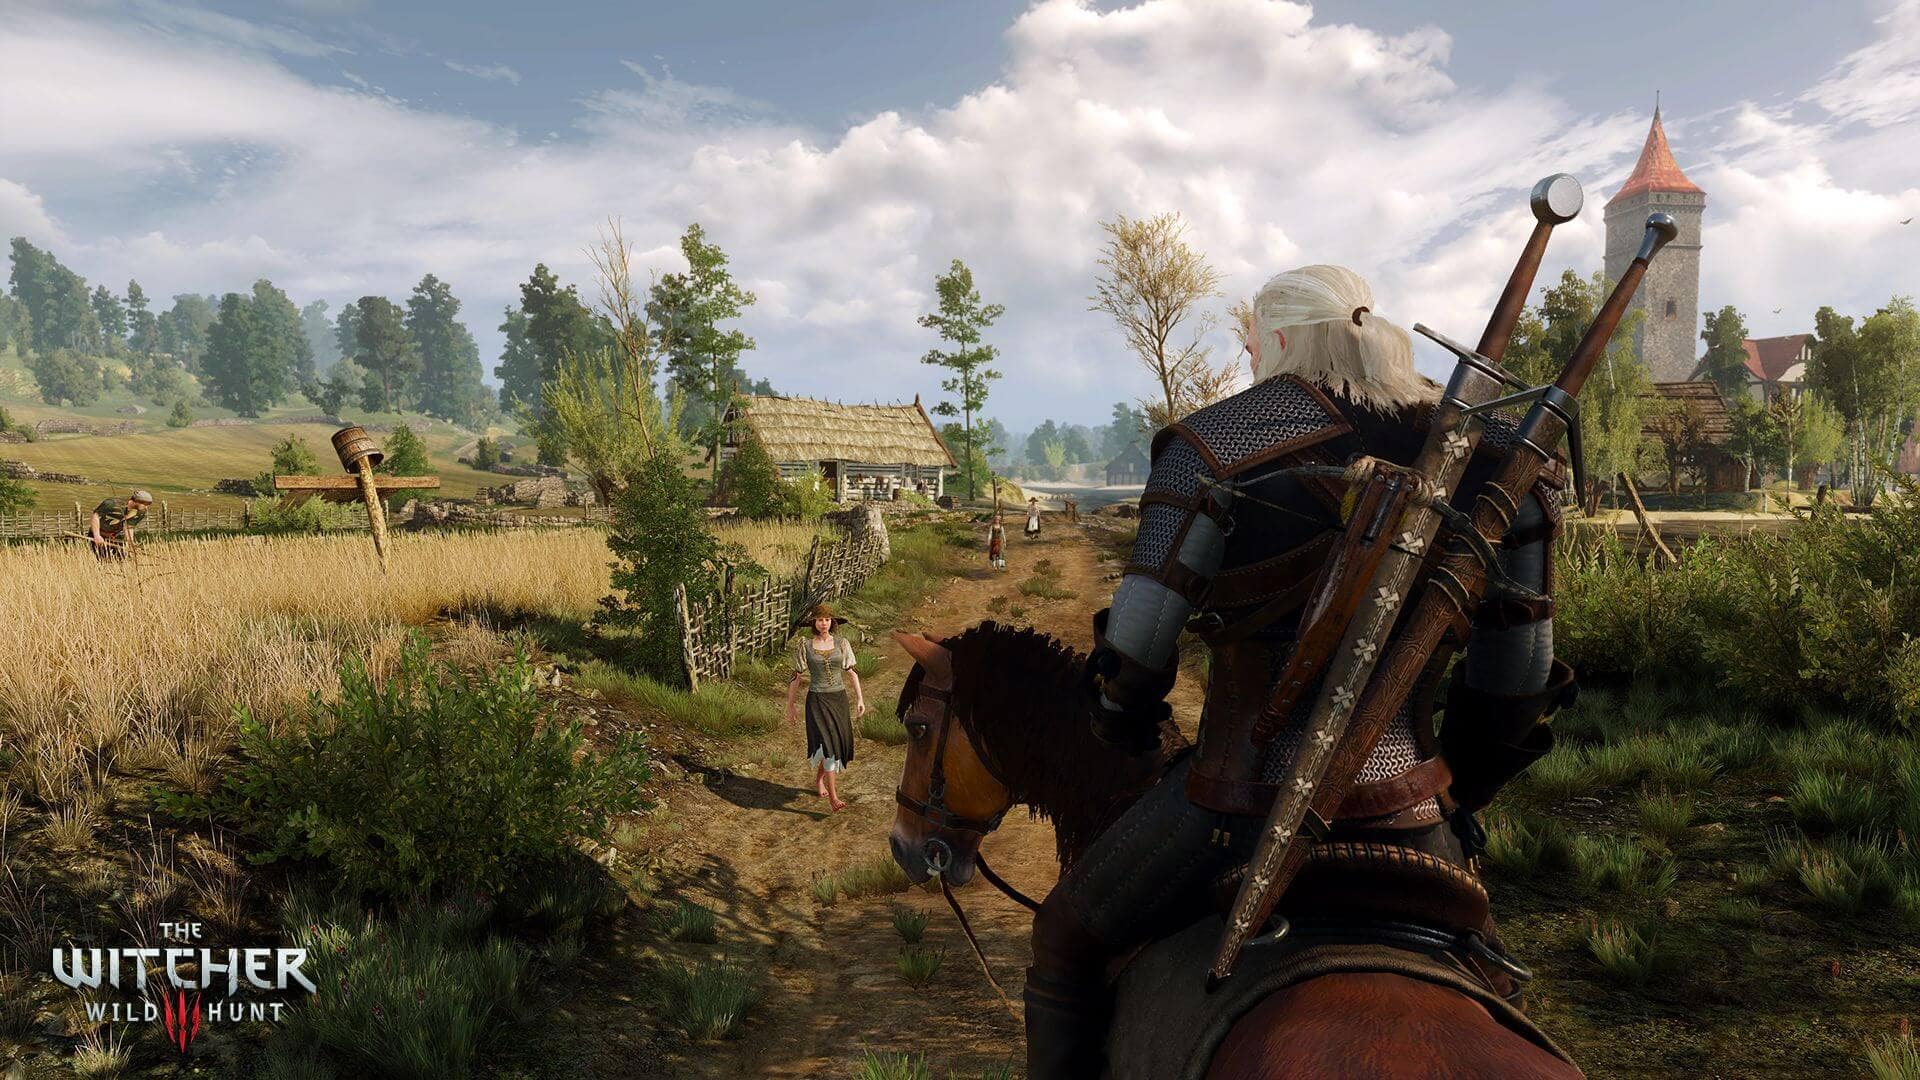 The Witcher 3: Wild Hunt Countryside Village Screenshot